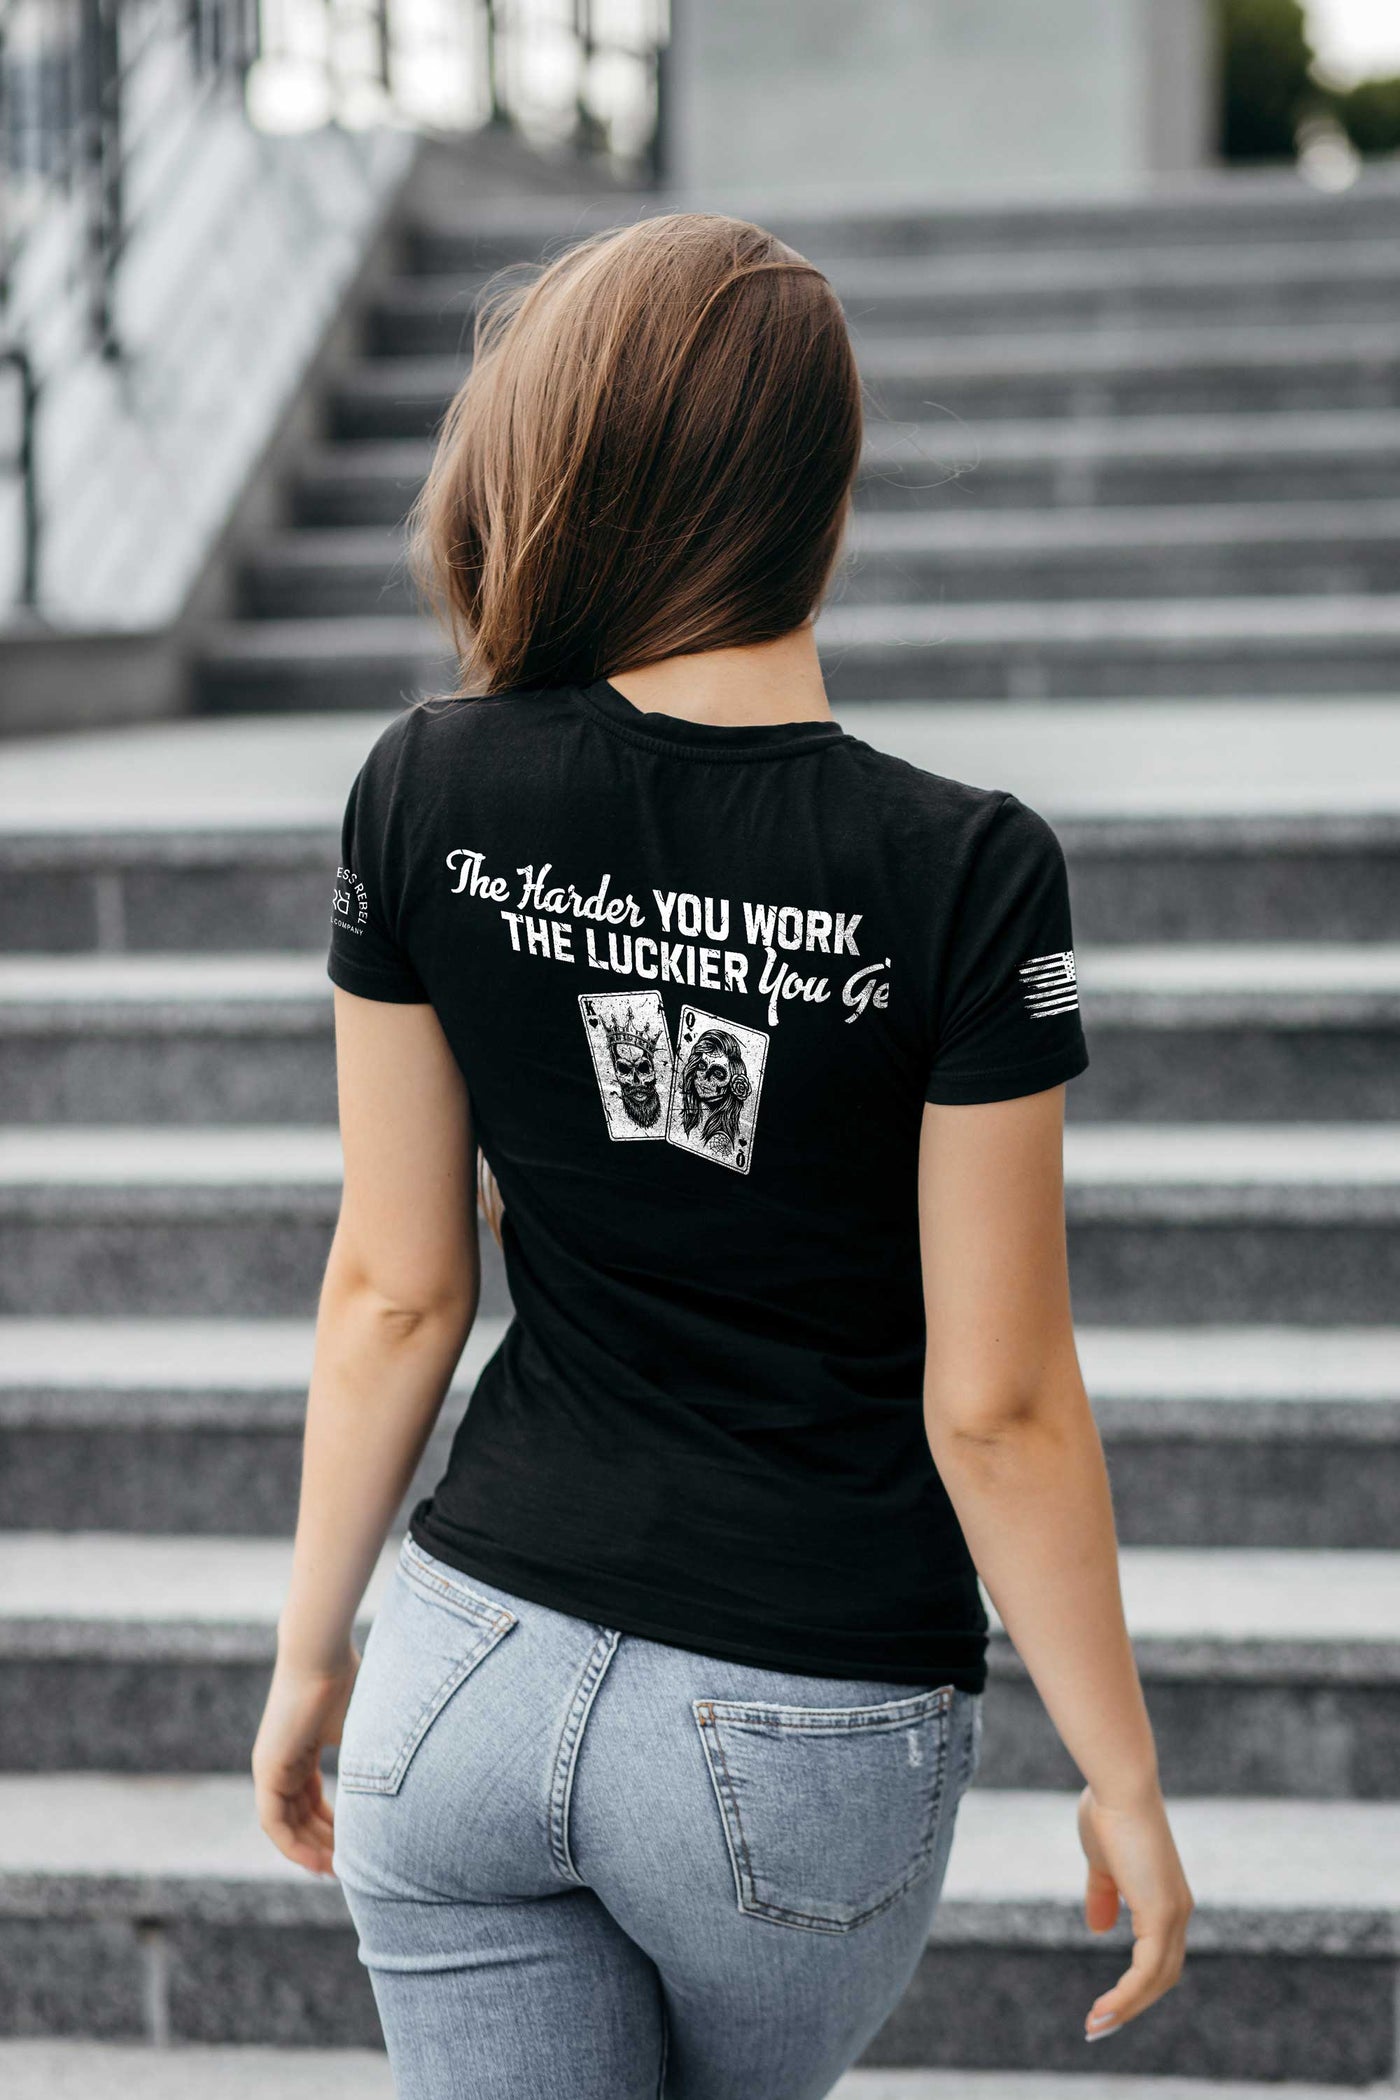 Woman wearing Solid Black Women's The Harder You Work Back Design Tee